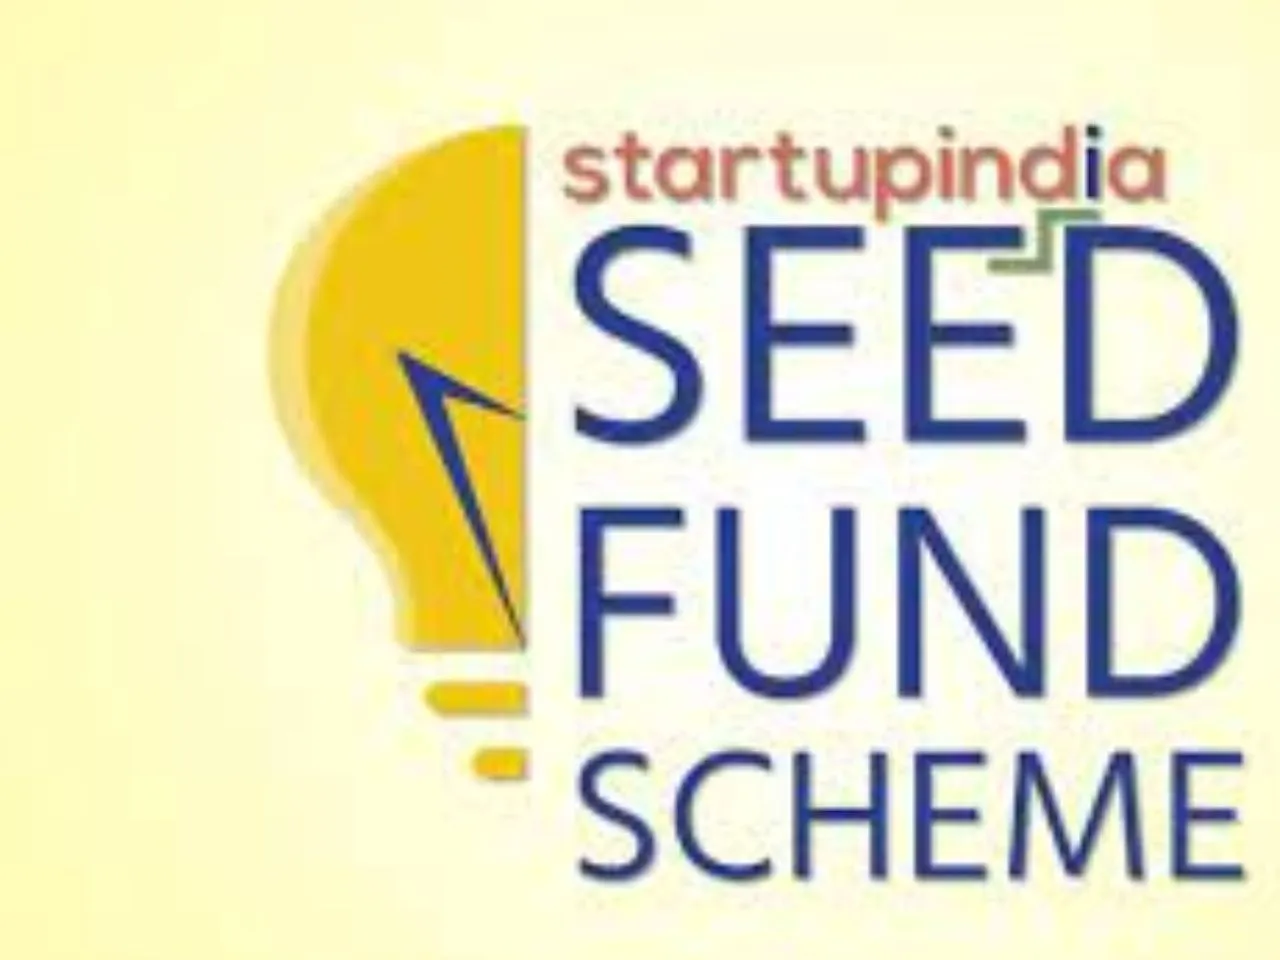 DPIIT To Take Third-Party Assessment of Startup India Seed Fund Scheme